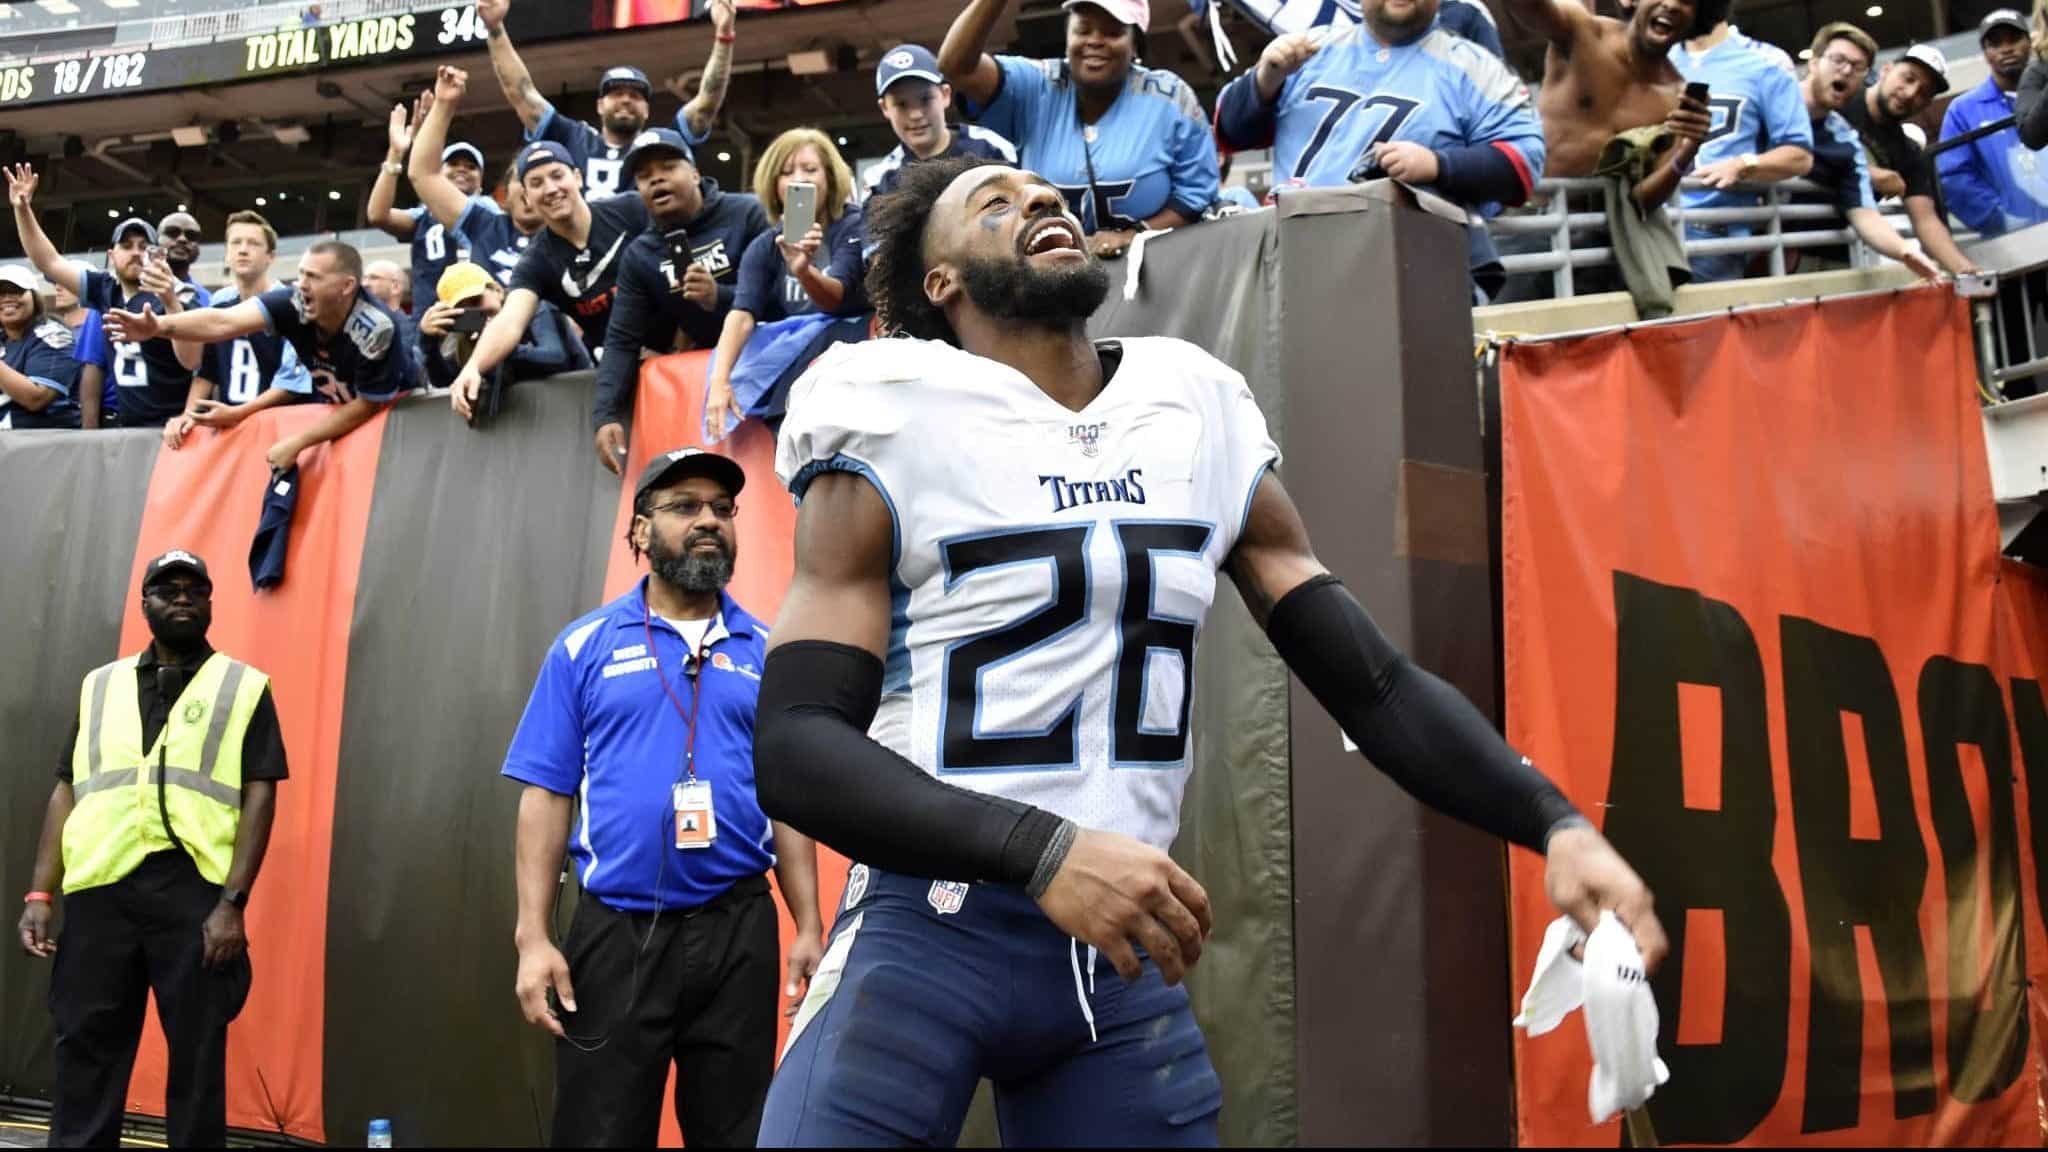 CLEVELAND, OHIO - SEPTEMBER 08: Cornerback Logan Ryan #26 of the Tennessee Titans celebrates after the Titans defeated the Cleveland Browns at FirstEnergy Stadium on September 08, 2019 in Cleveland, Ohio. The Titans defeated the Browns 43-13.